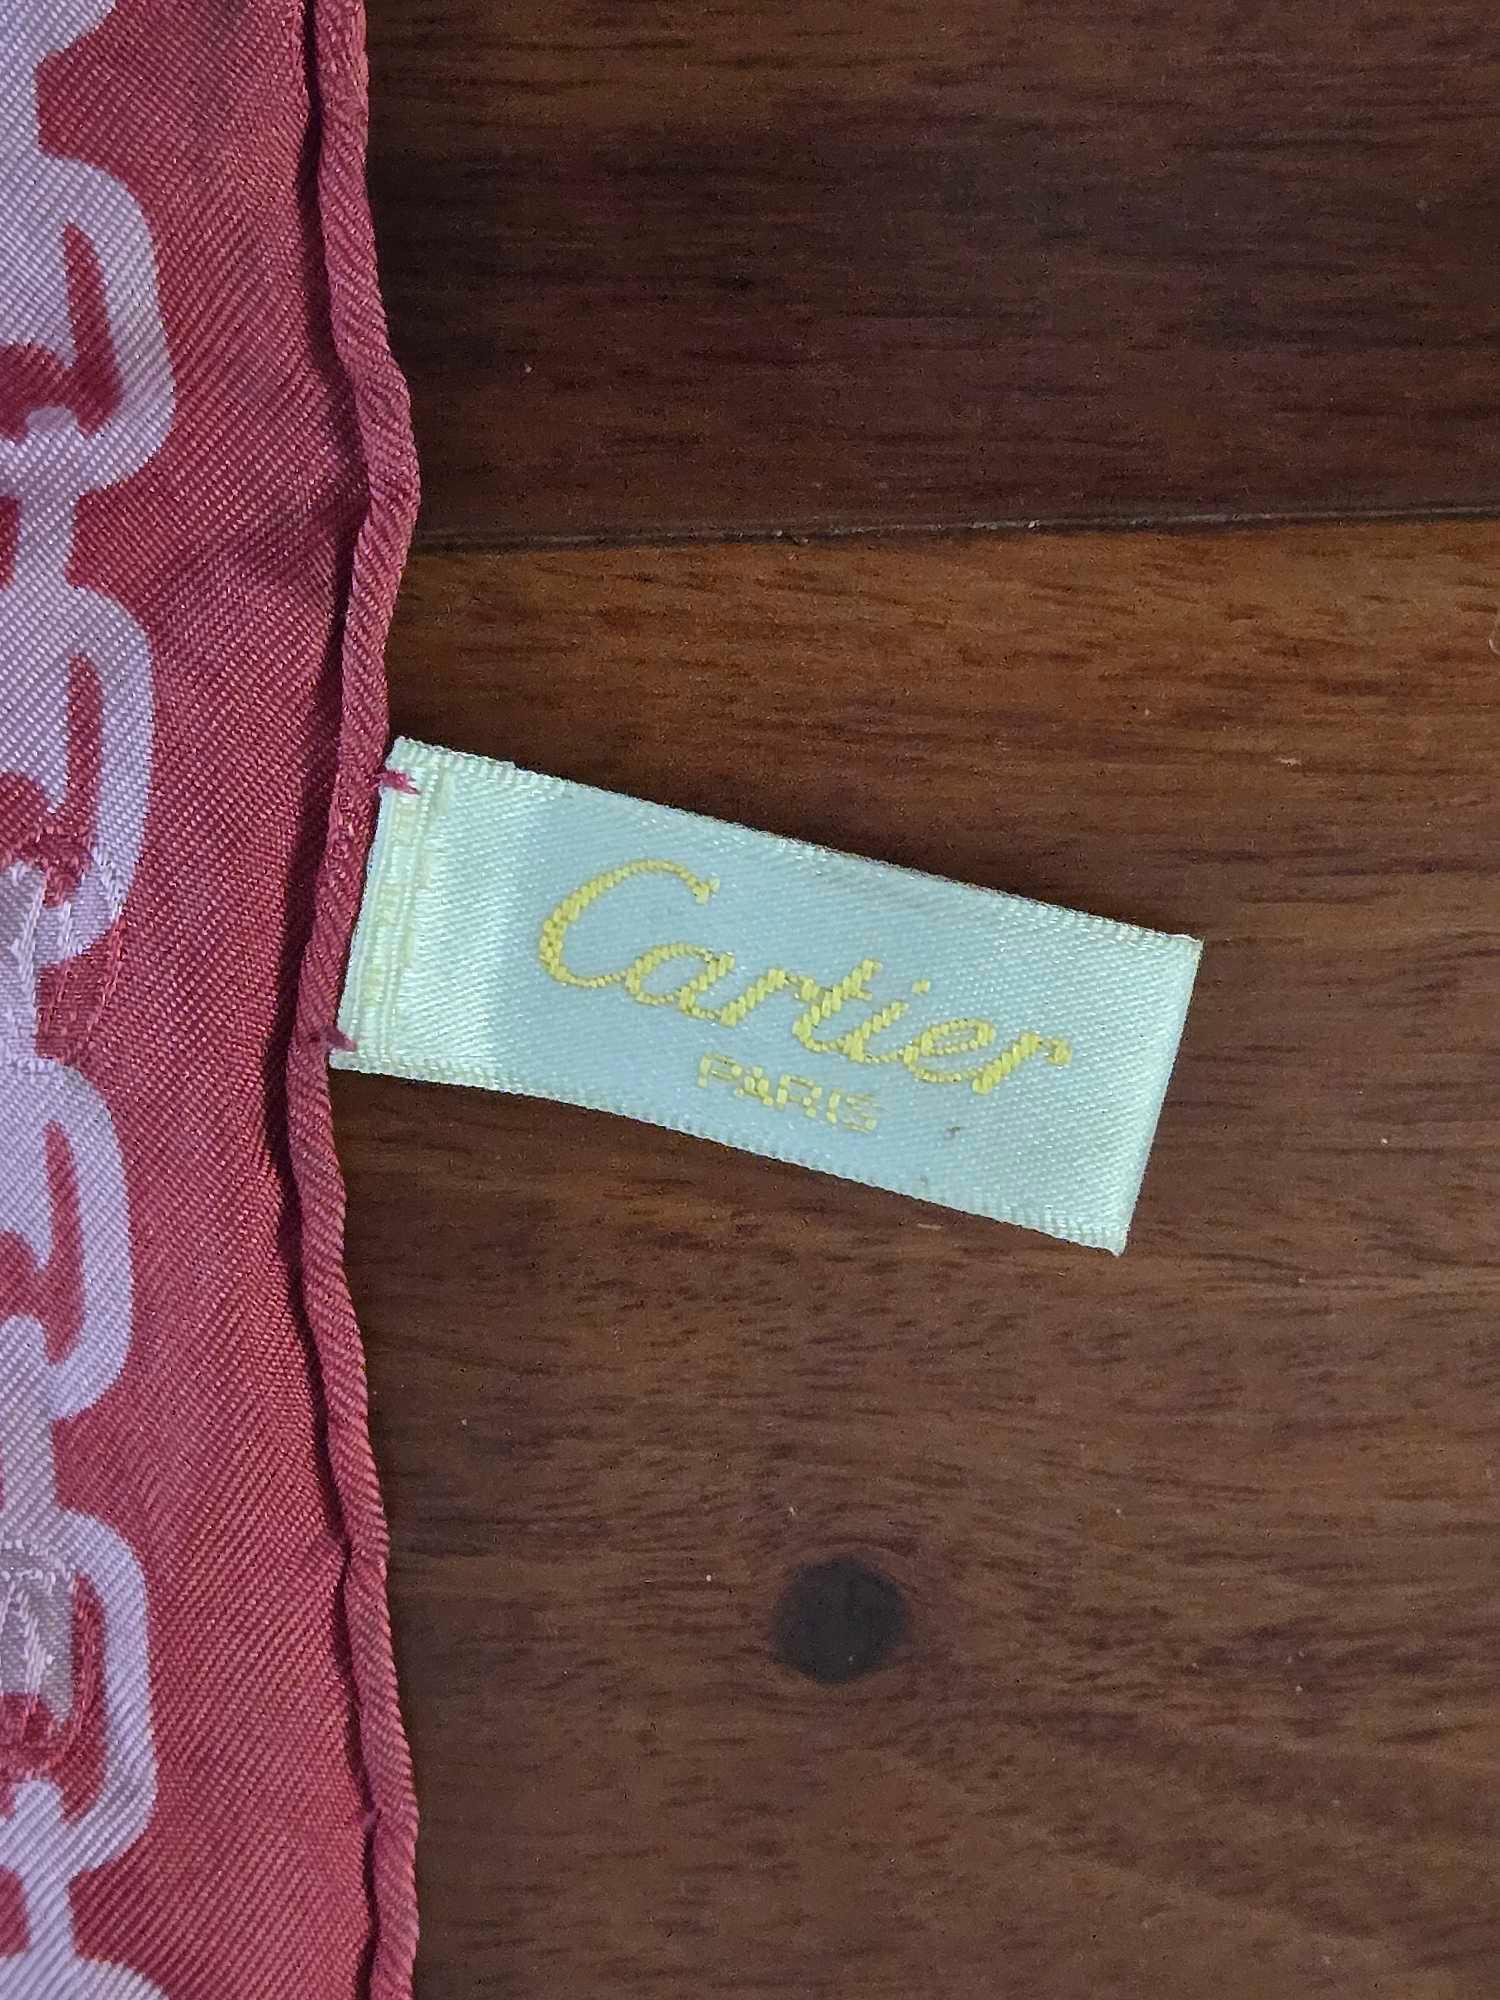 Authentic Pre-Owned Vintage Chanel & Cartier Silk Scarves w/ COAs Plus Hermes Scented Drawer Liner